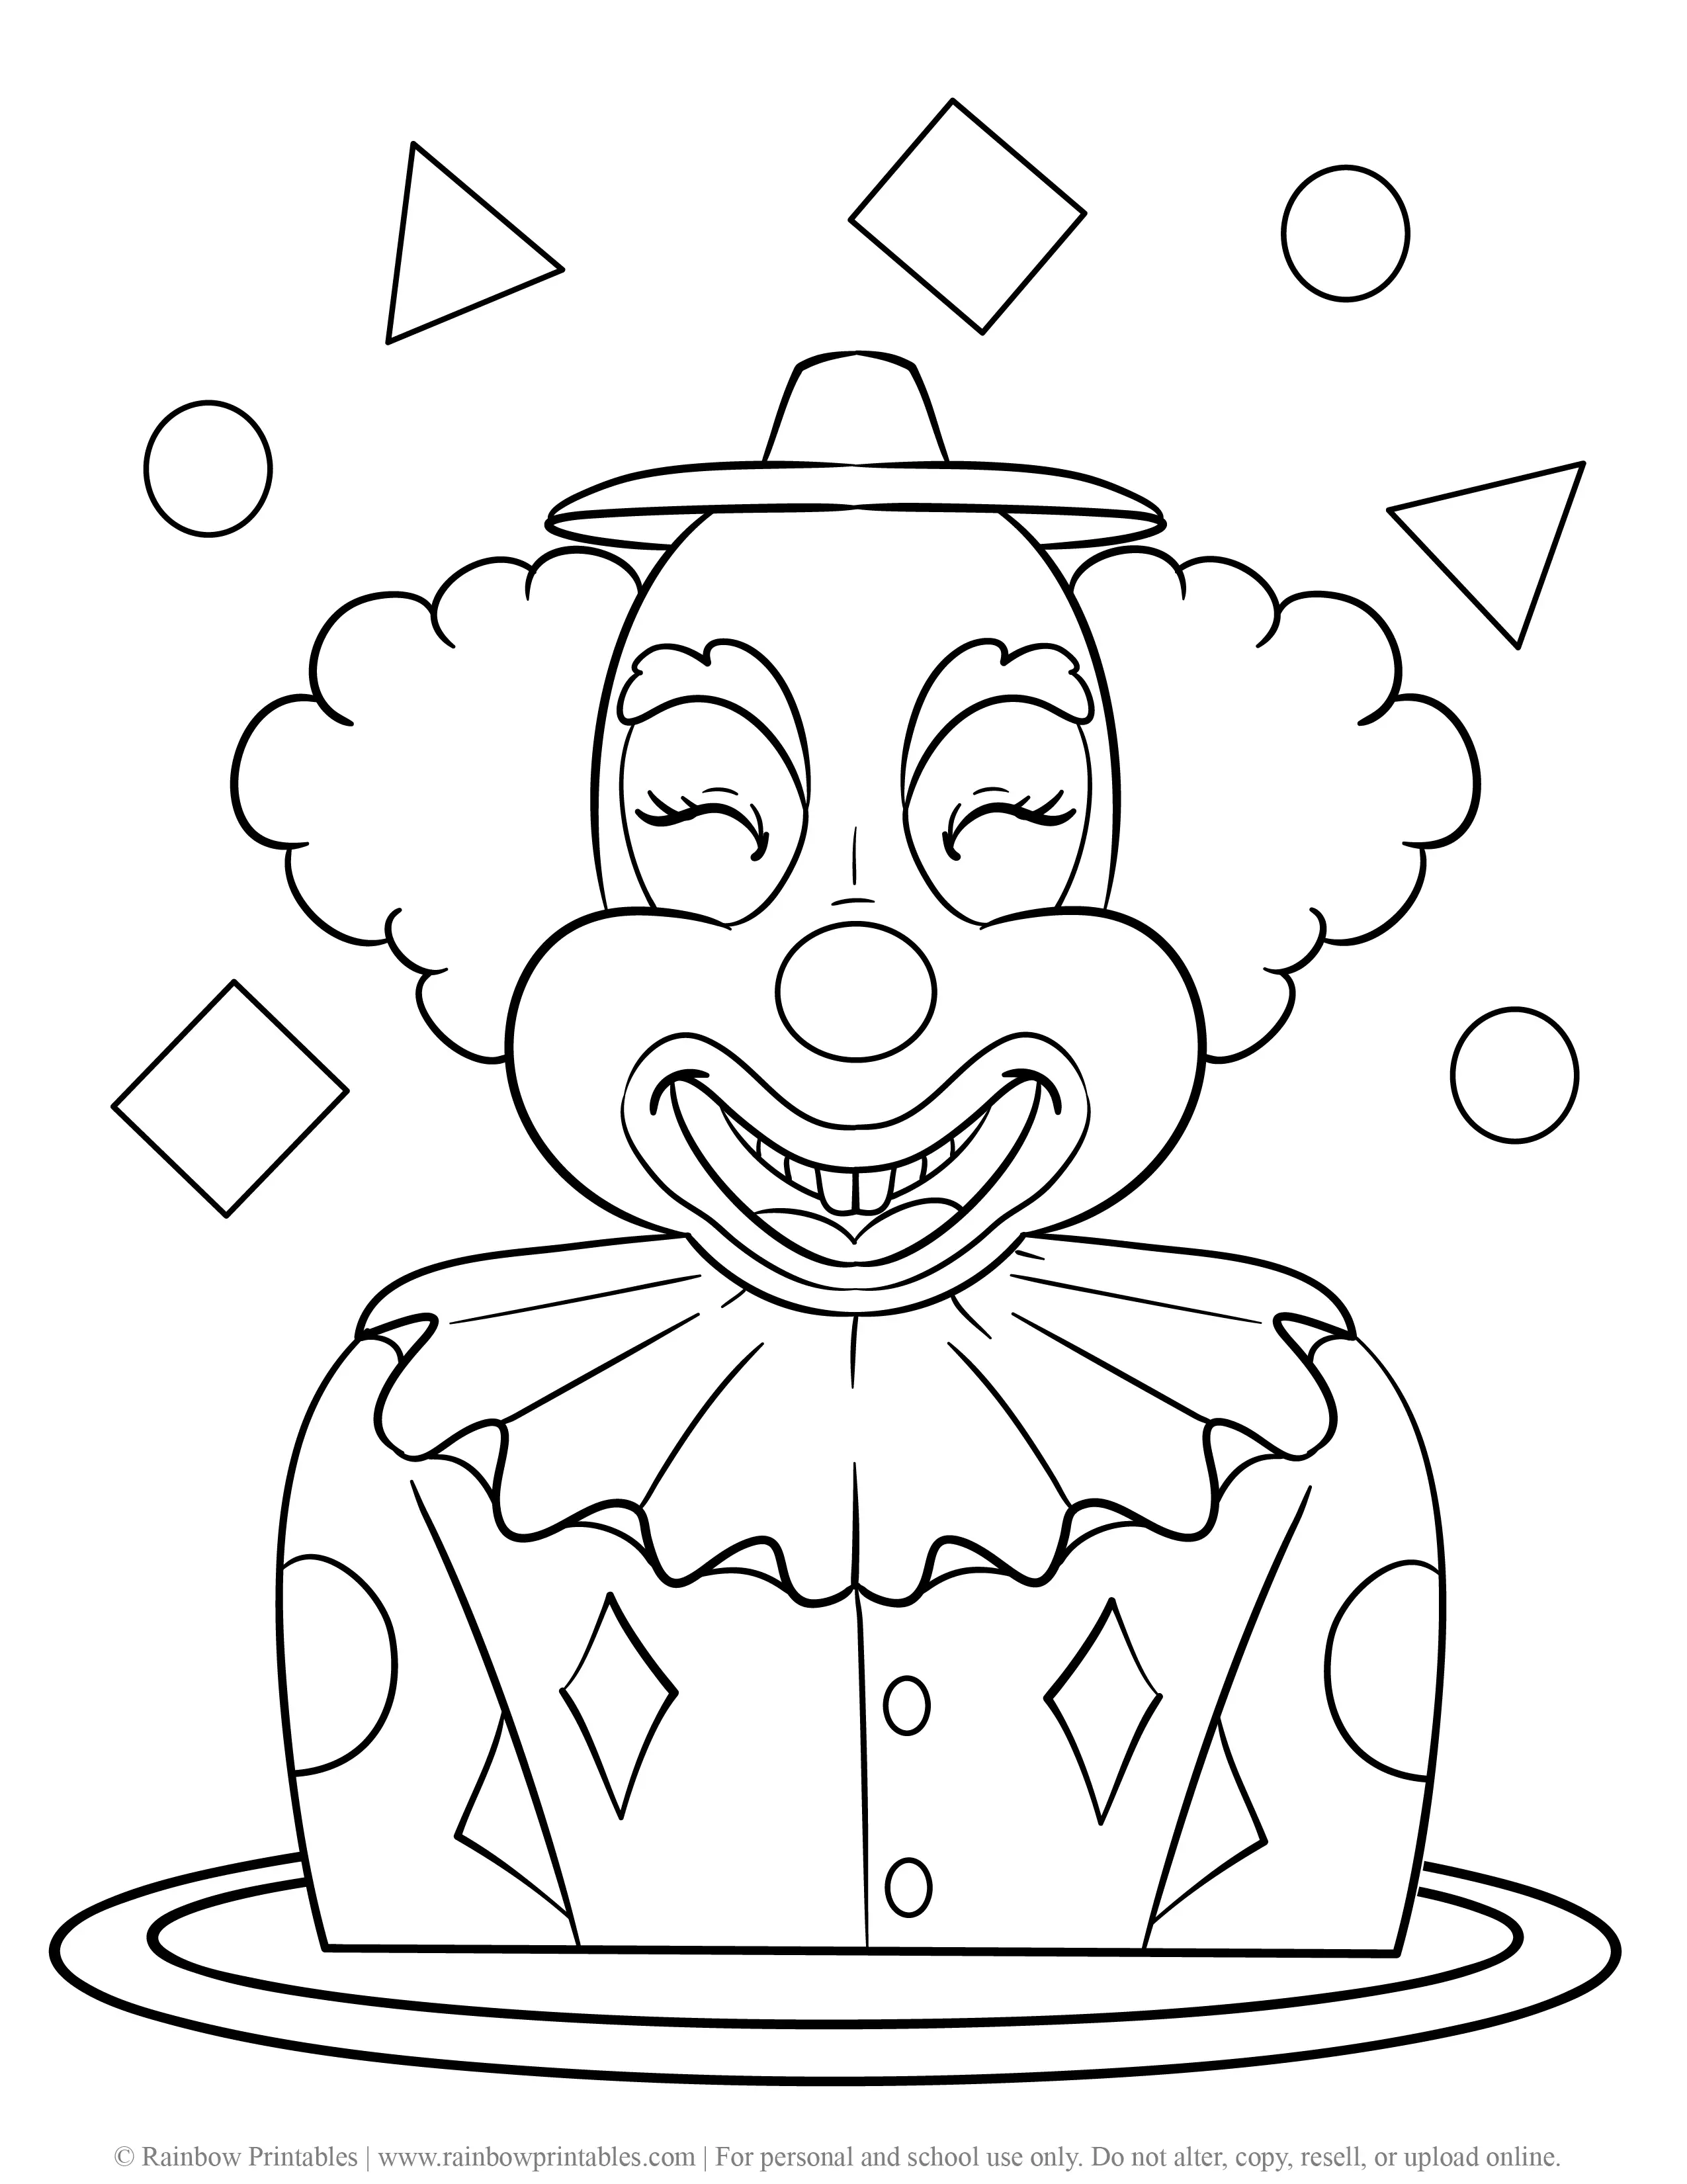 Cute clown coloring pages for kids shapes